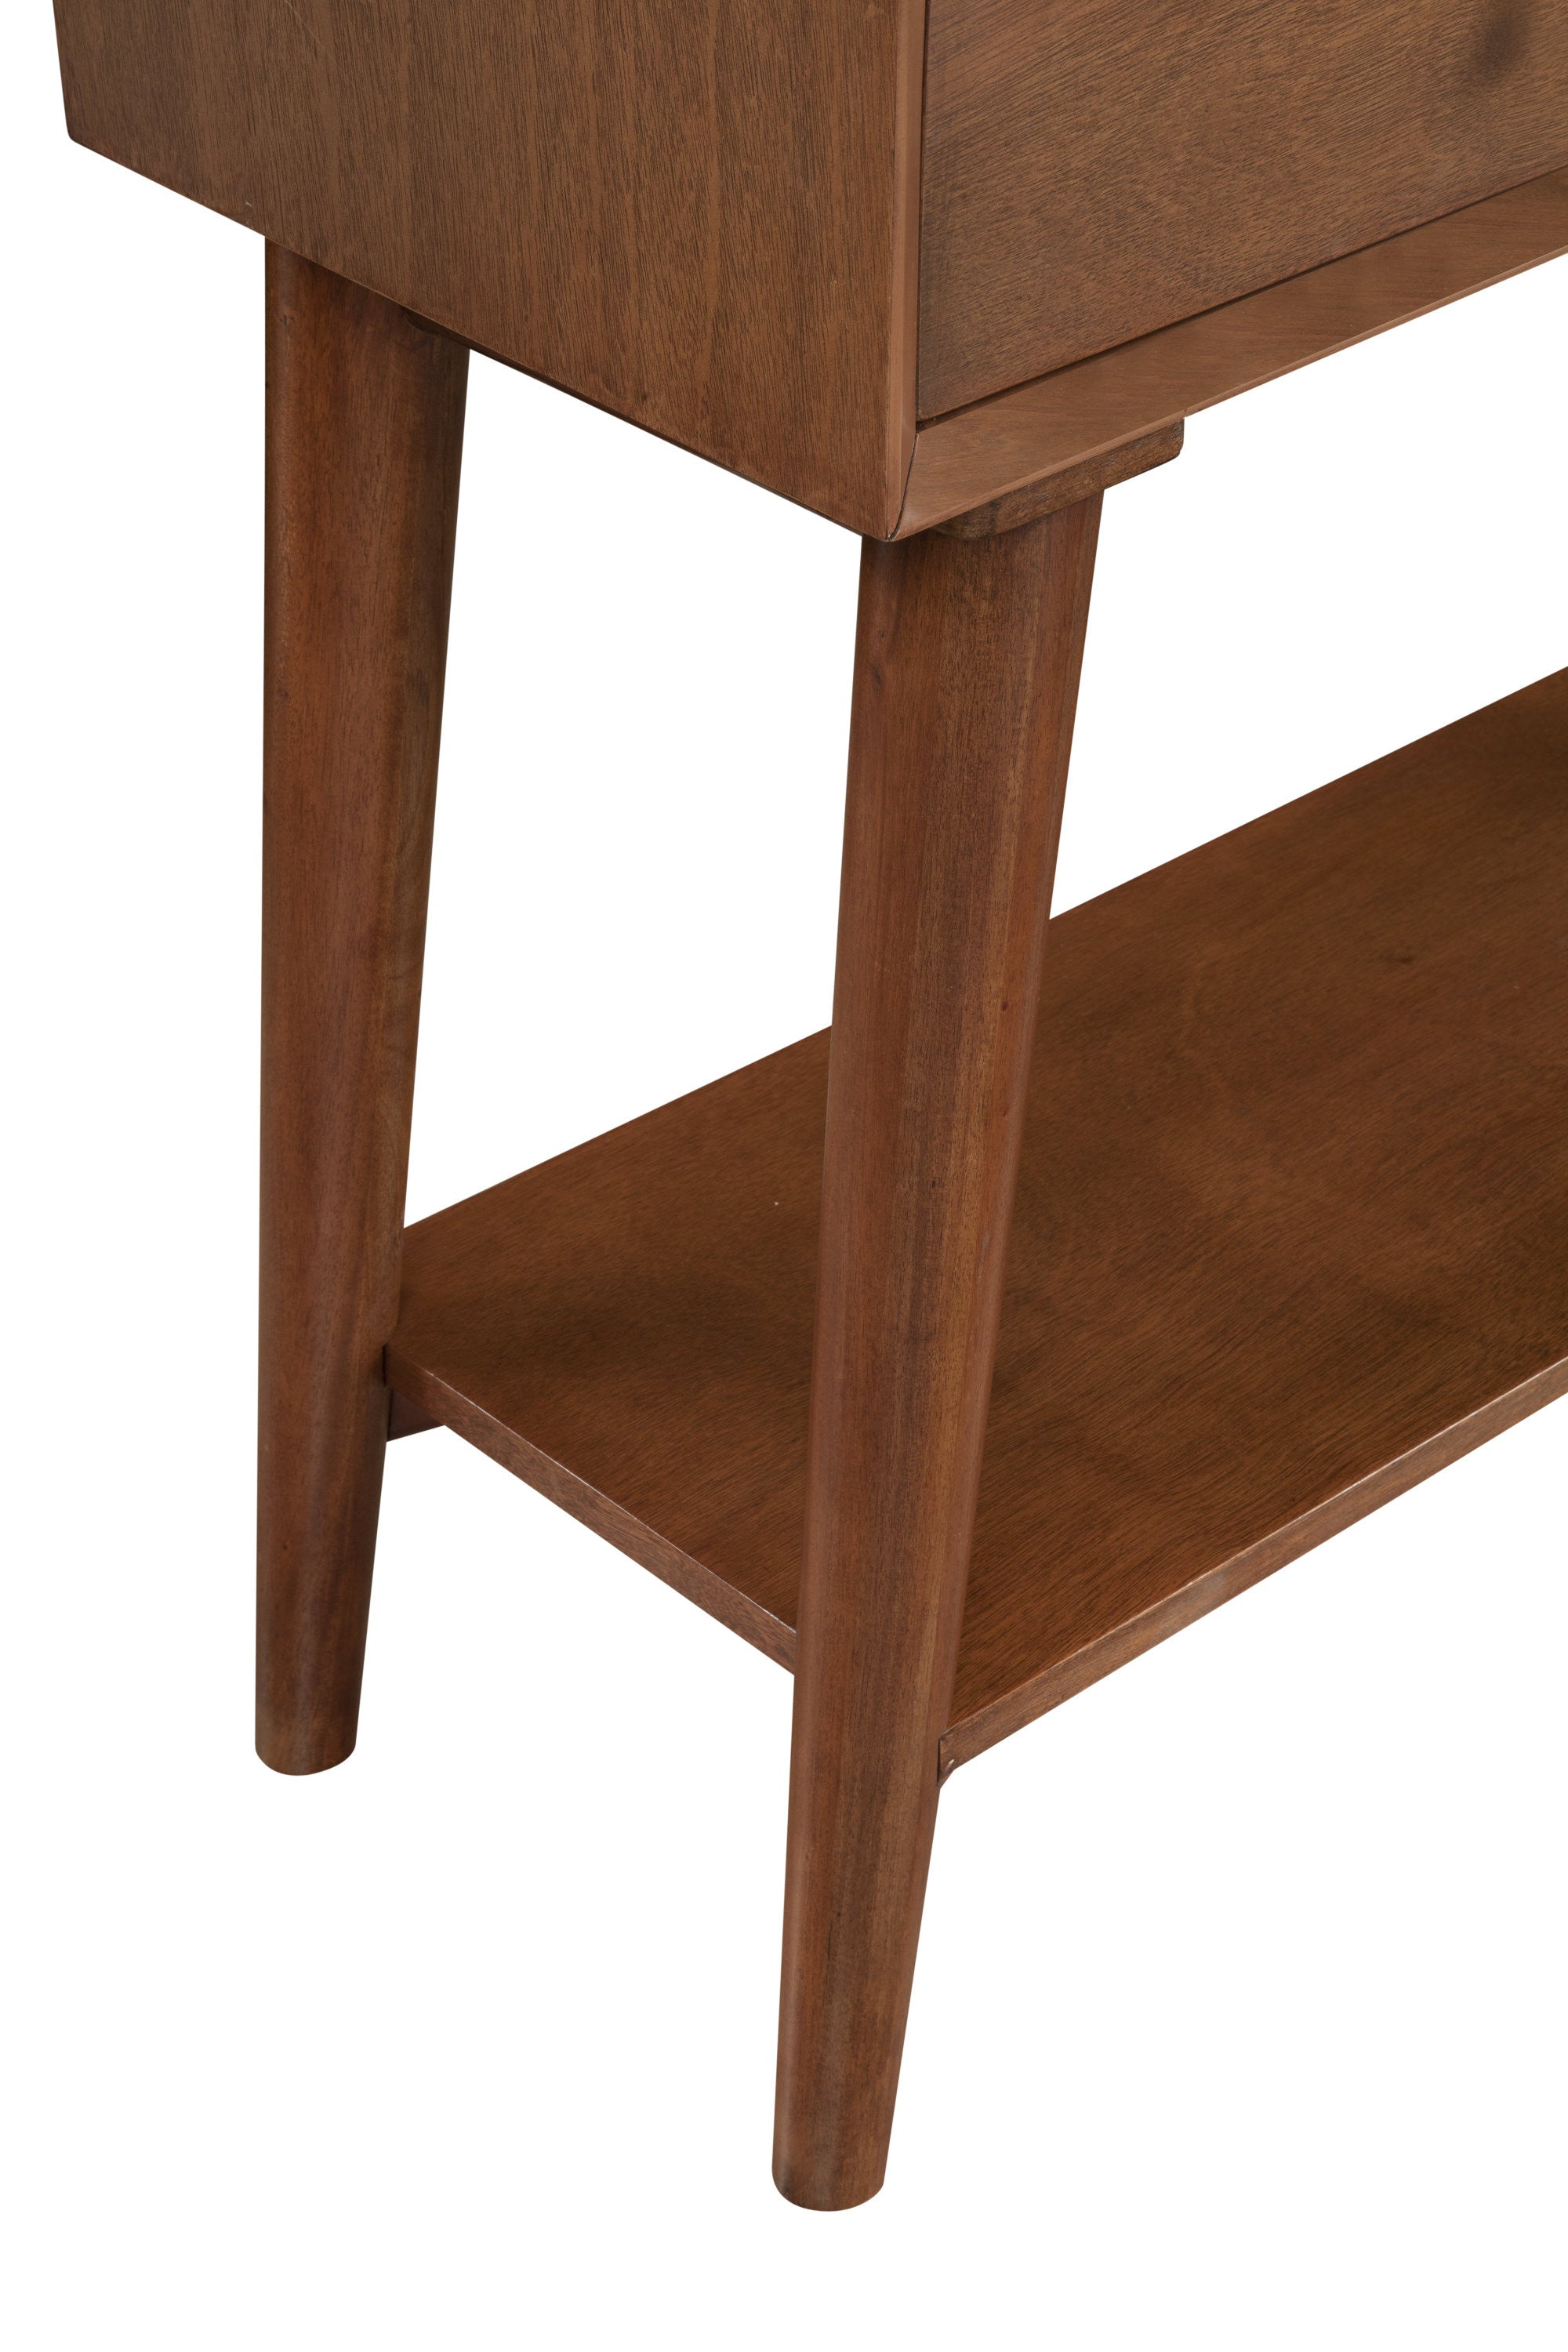 42" Brown Solid and Manufactured Wood Floor Shelf Console Table With Storage With Storage